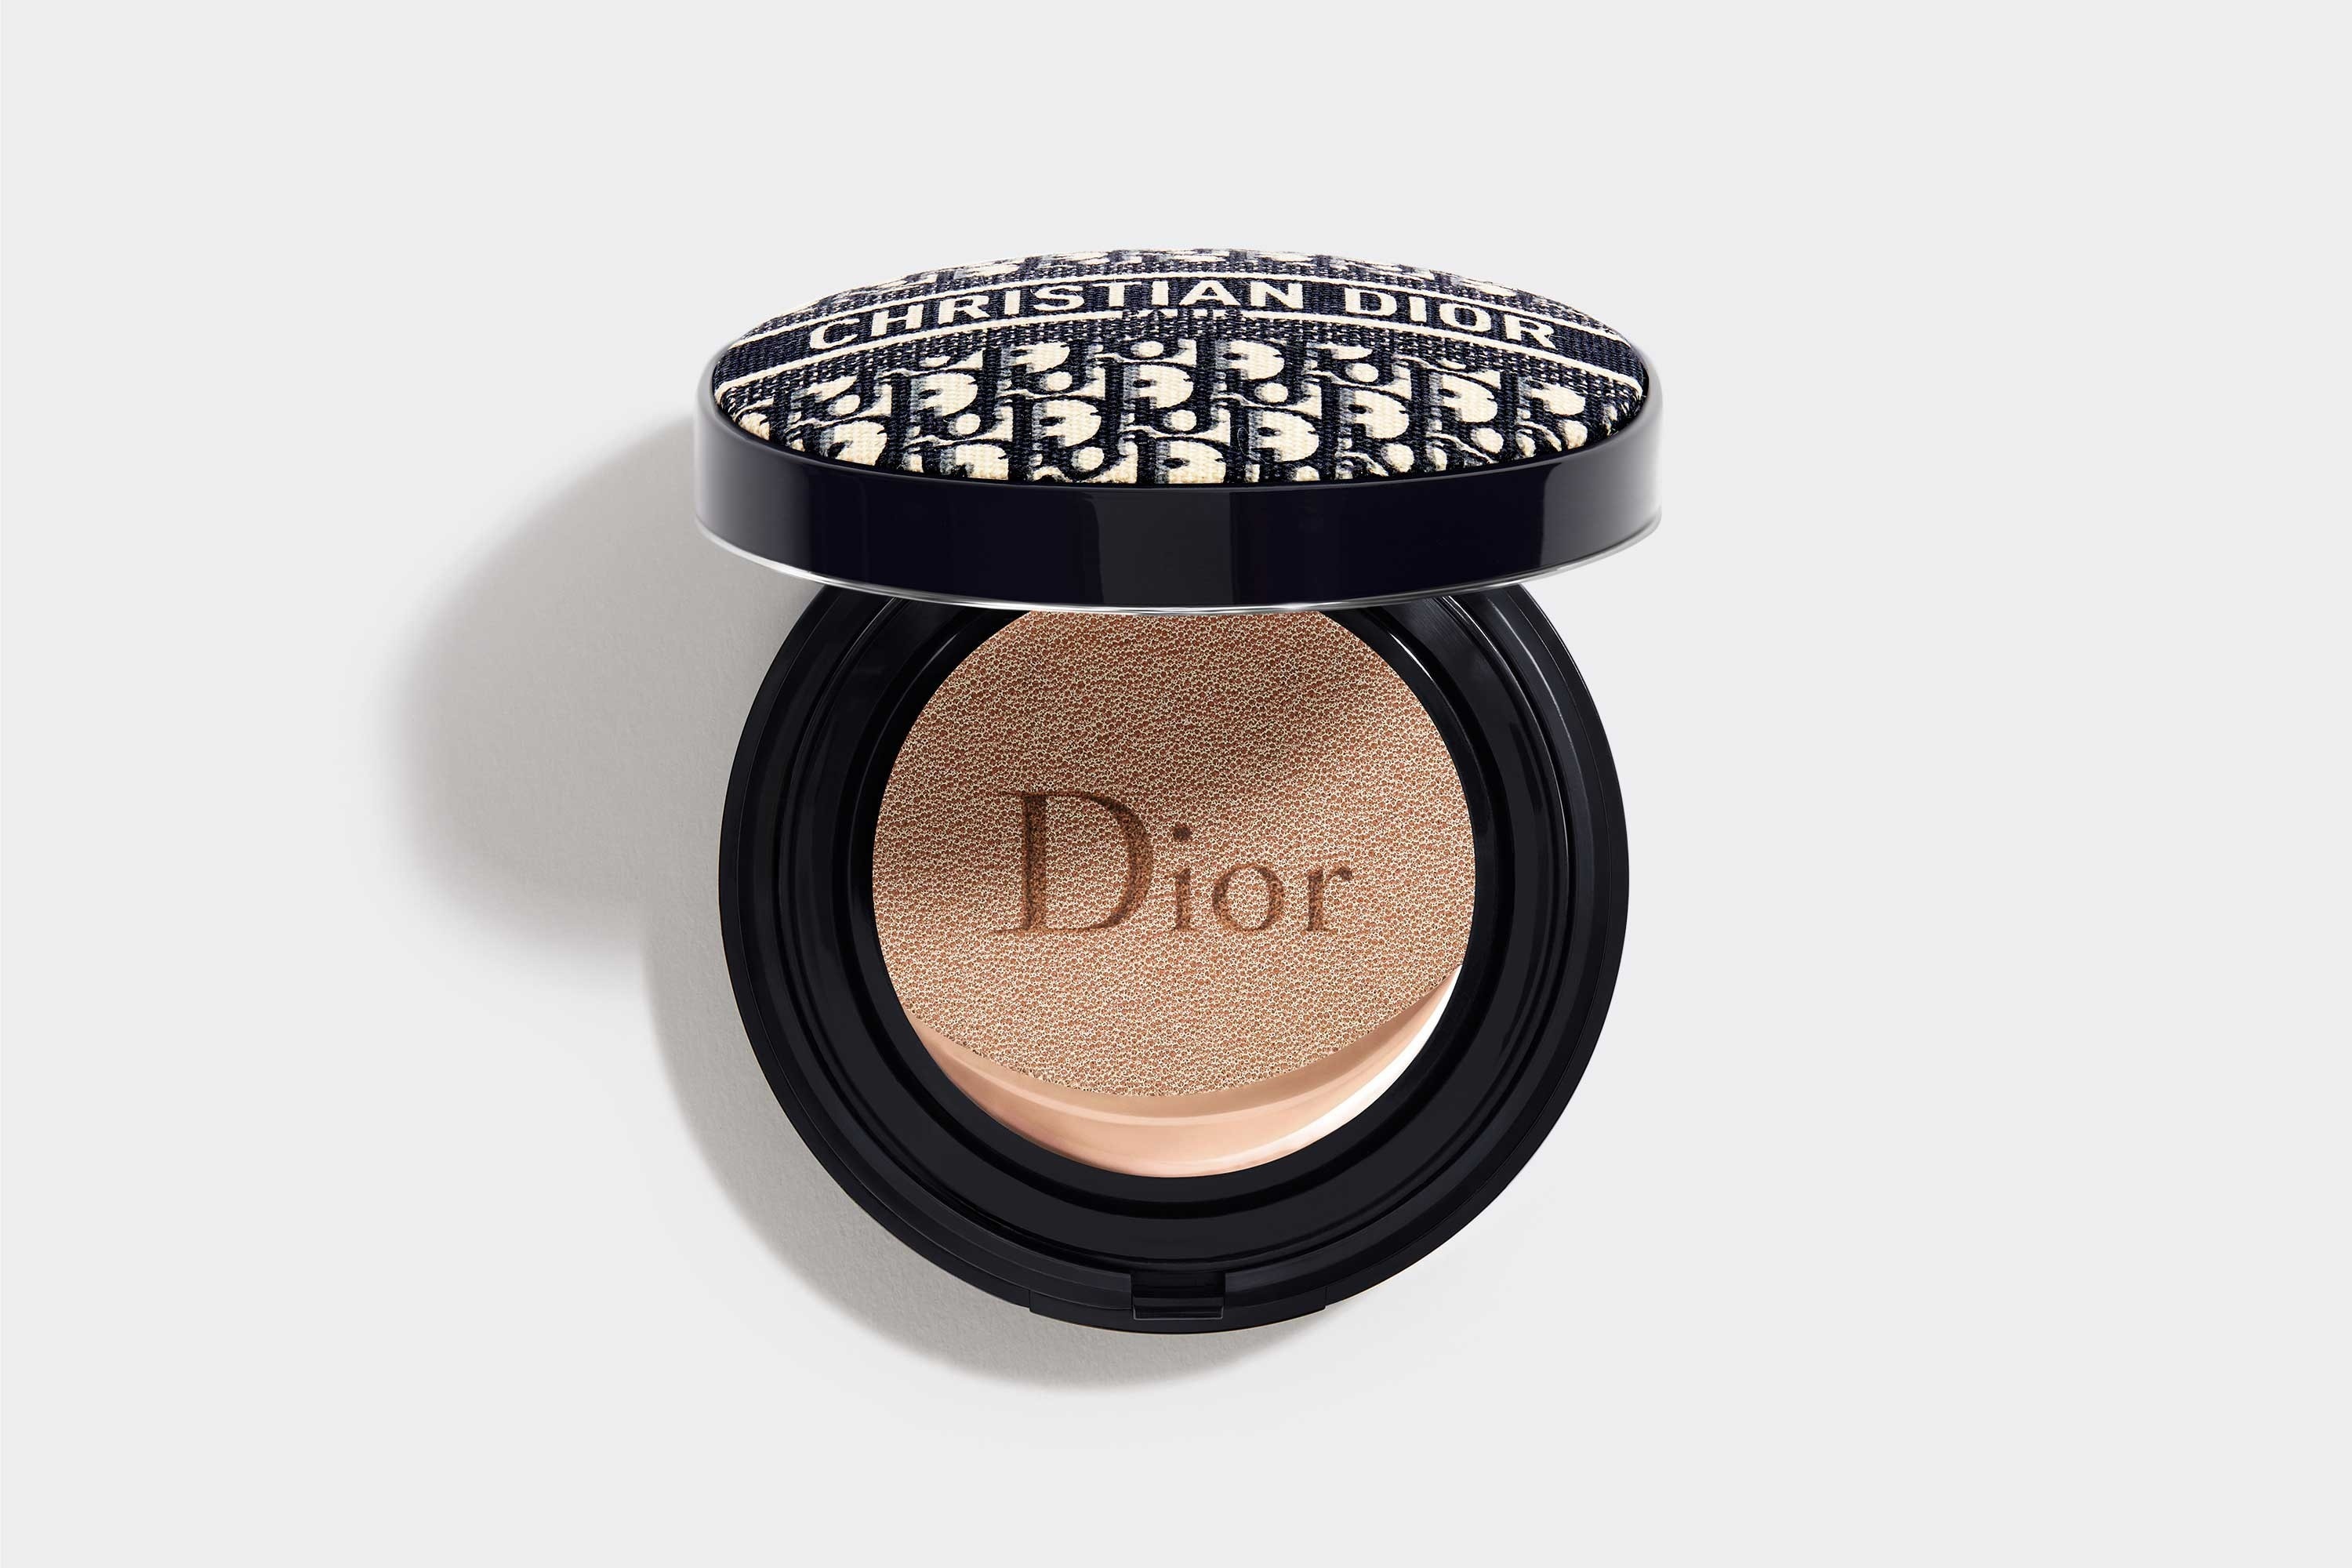 DIOR FOREVER PERFECT CUSHION – DIORMANIA LIMITED EDITION | OneClicks